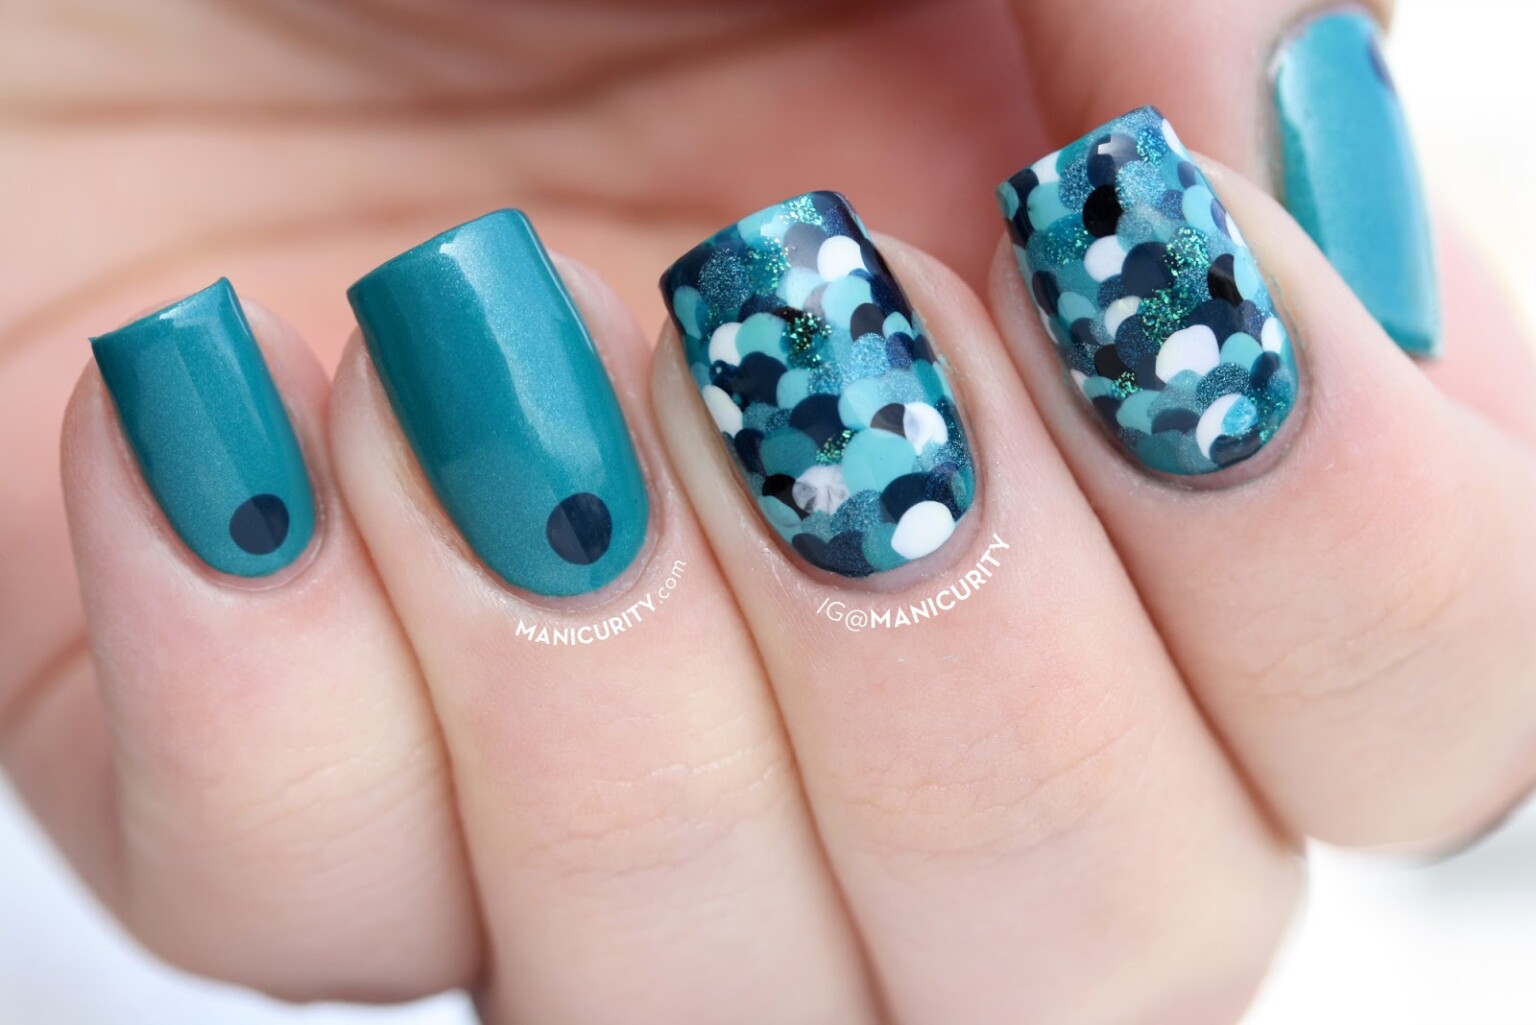 2. Creative Nail Art Ideas with Tape - wide 2